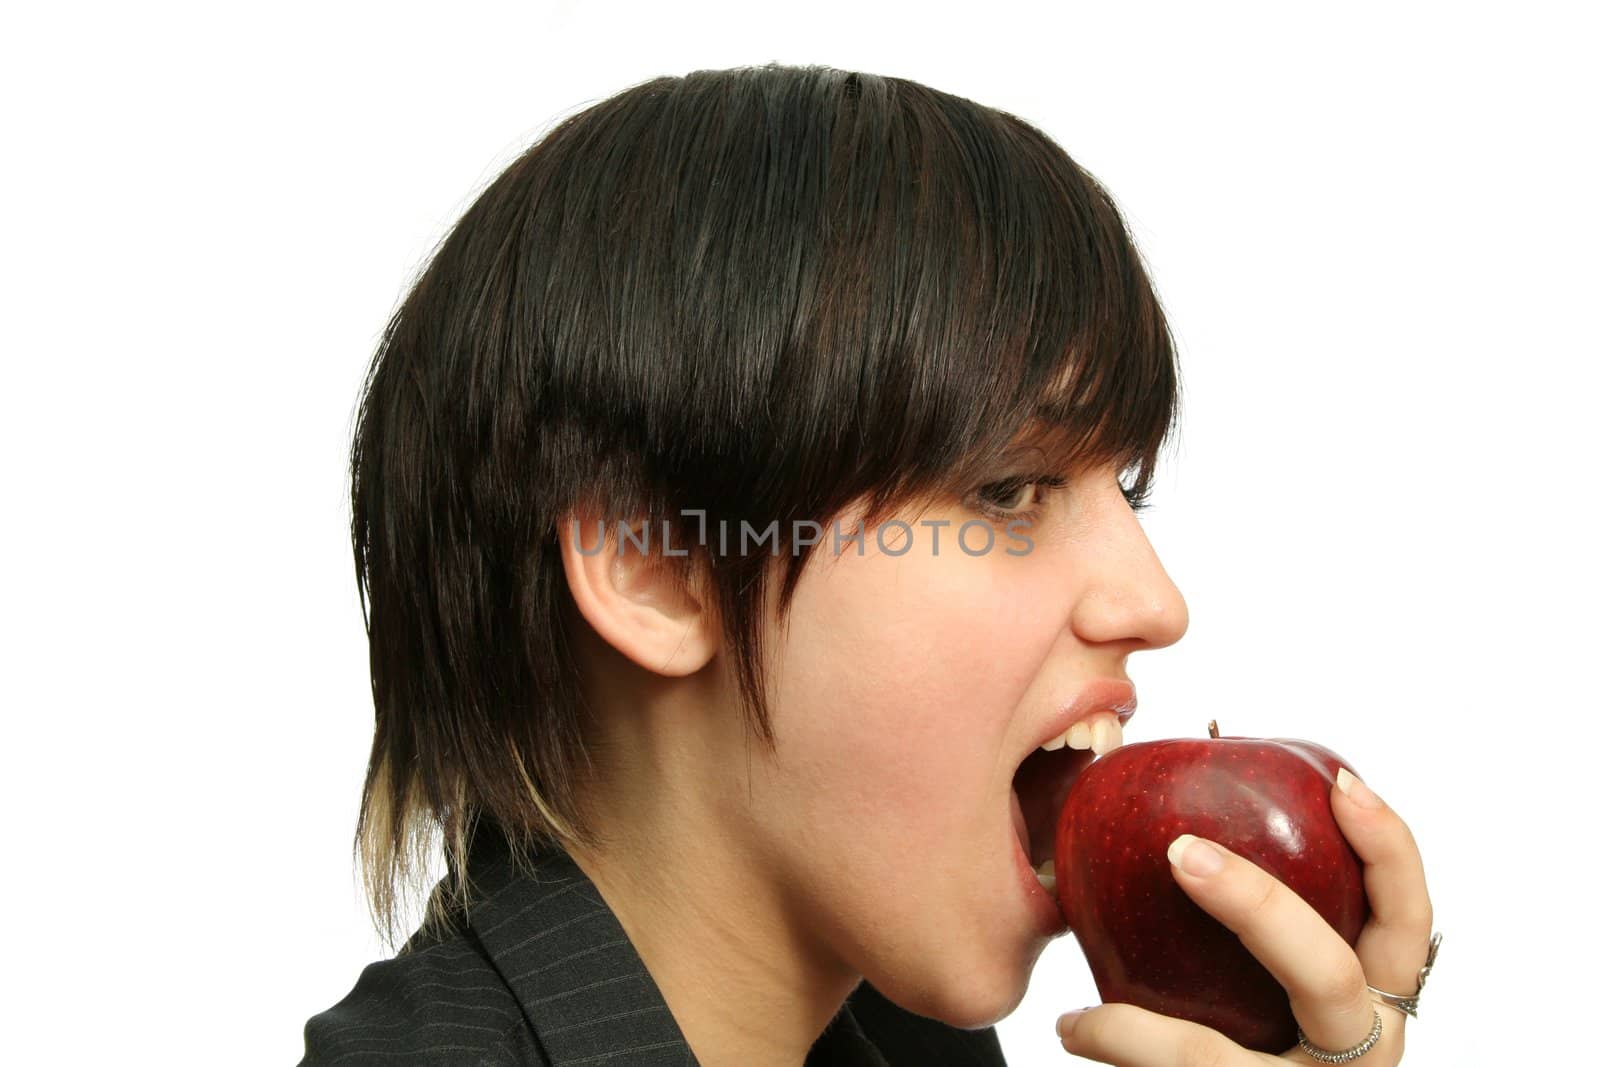 The young girl with a red apple, isolated on white